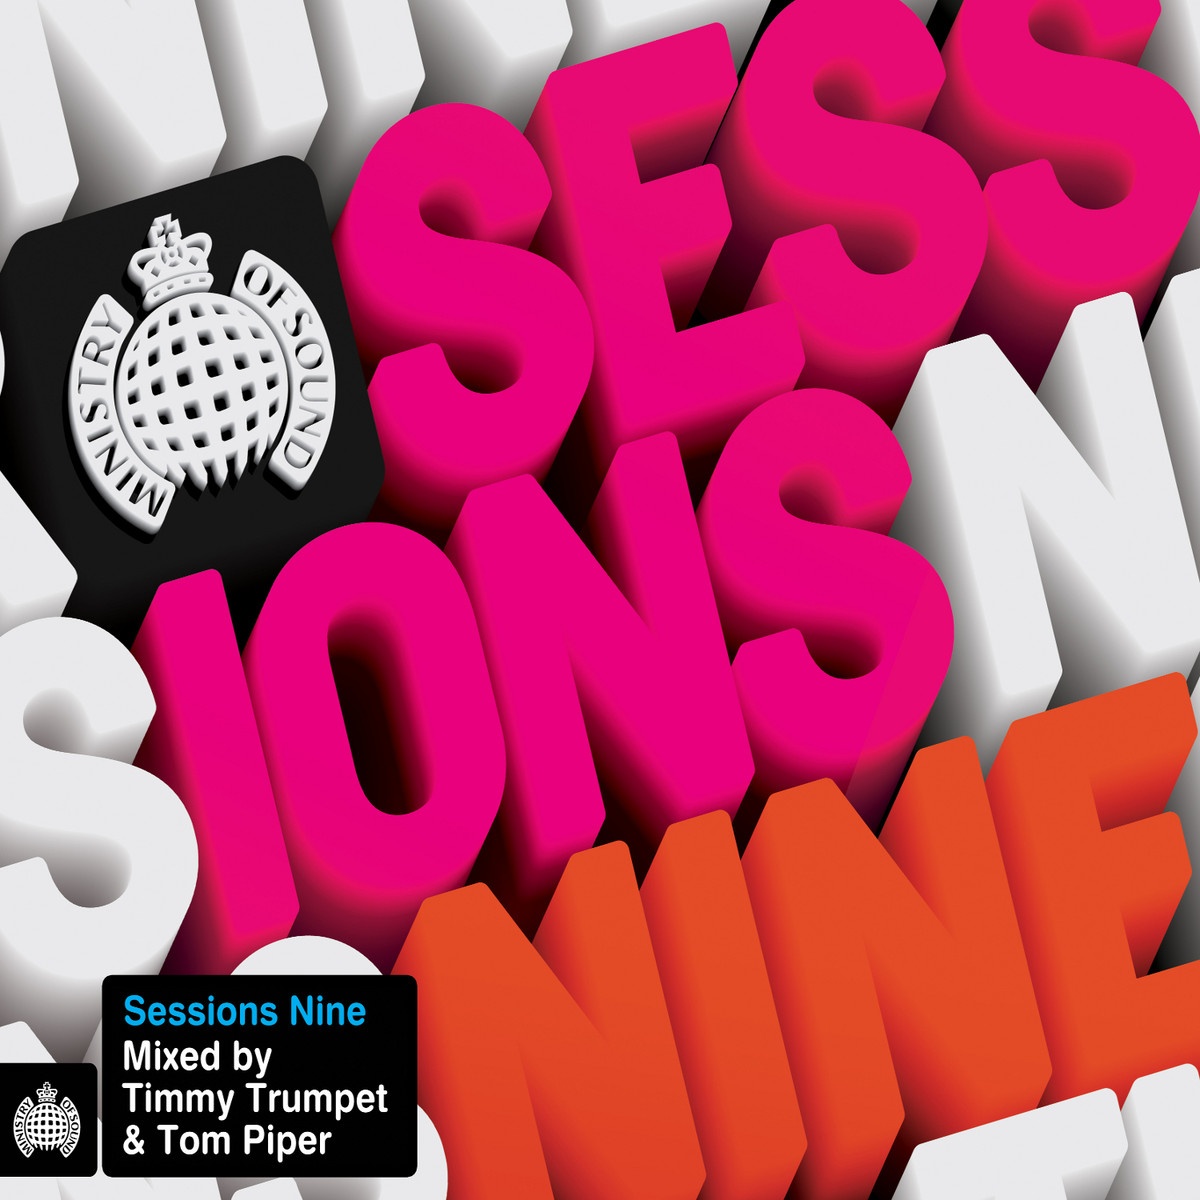 Ministry of Sound: Sessions Nine